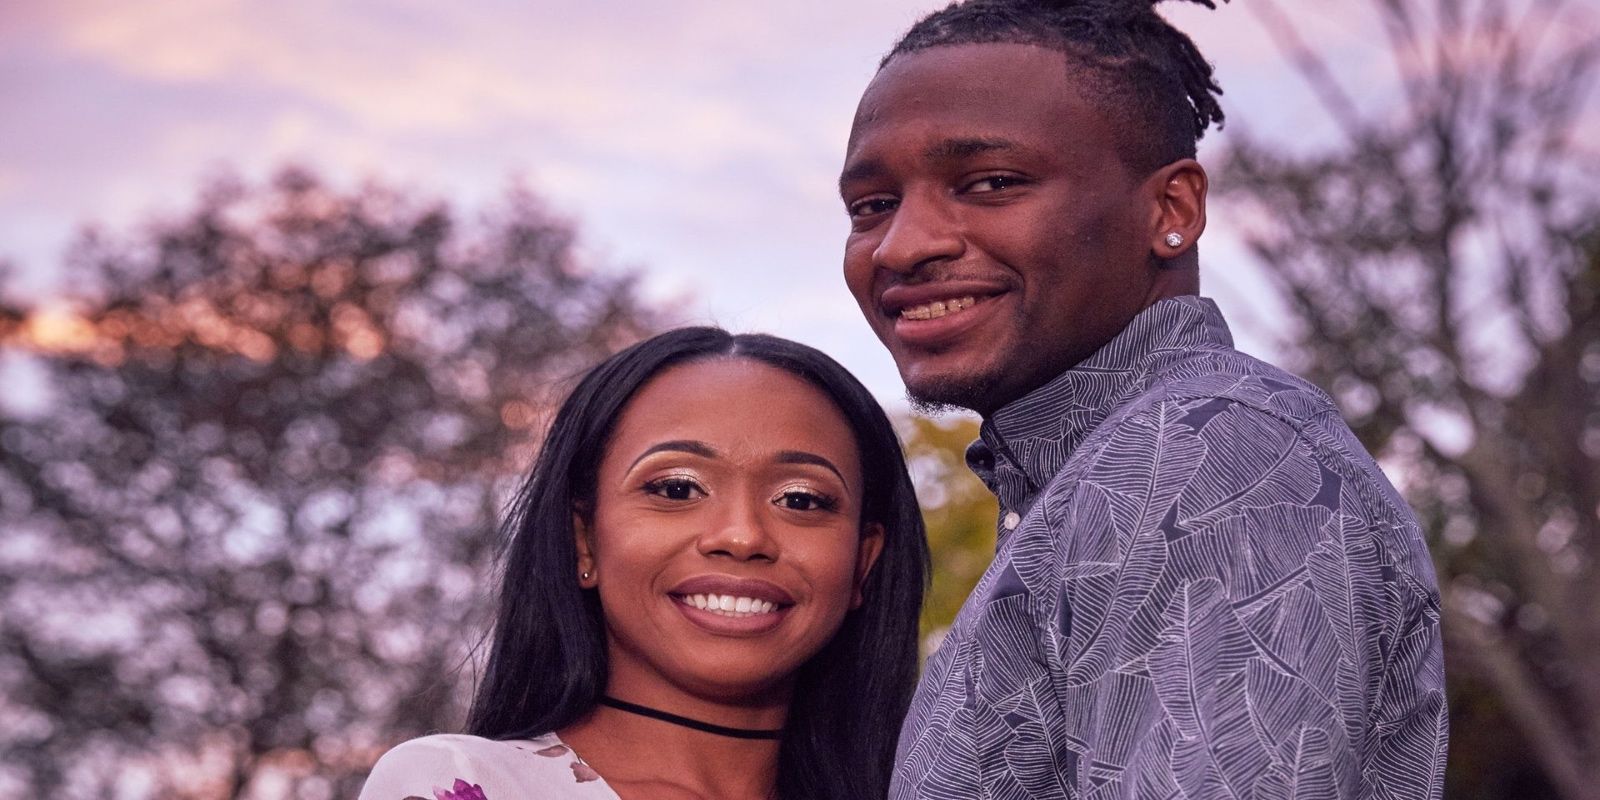 Shawniece y Jephte de Married at First Sight Temporada 6